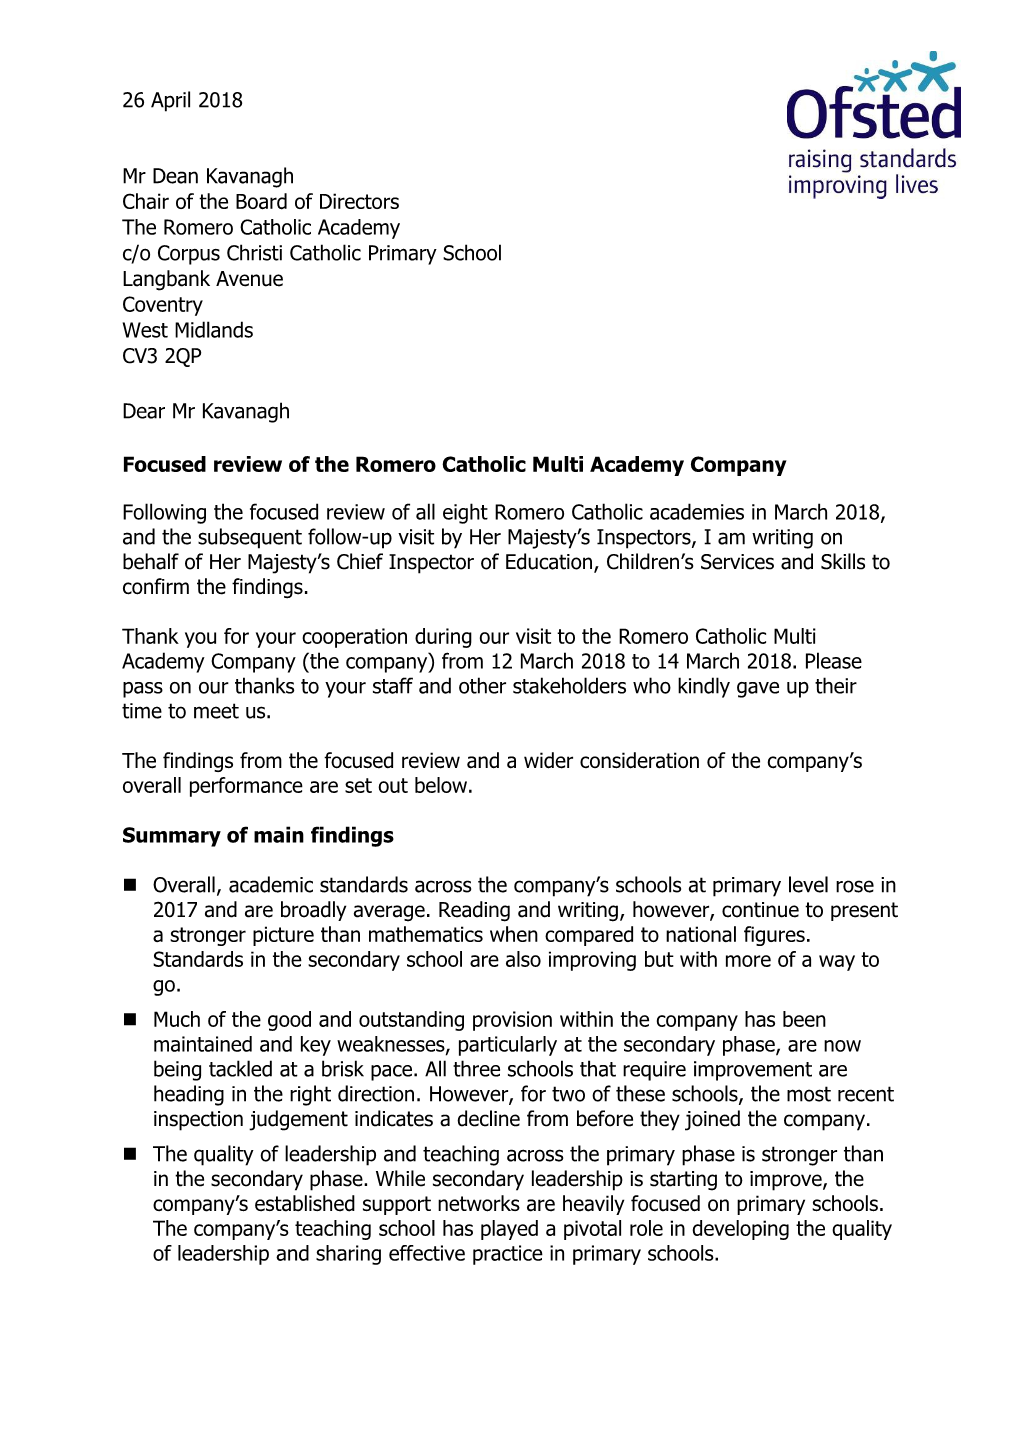 Romero Catholic Multi Academy Company: Ofsted Inspection Report